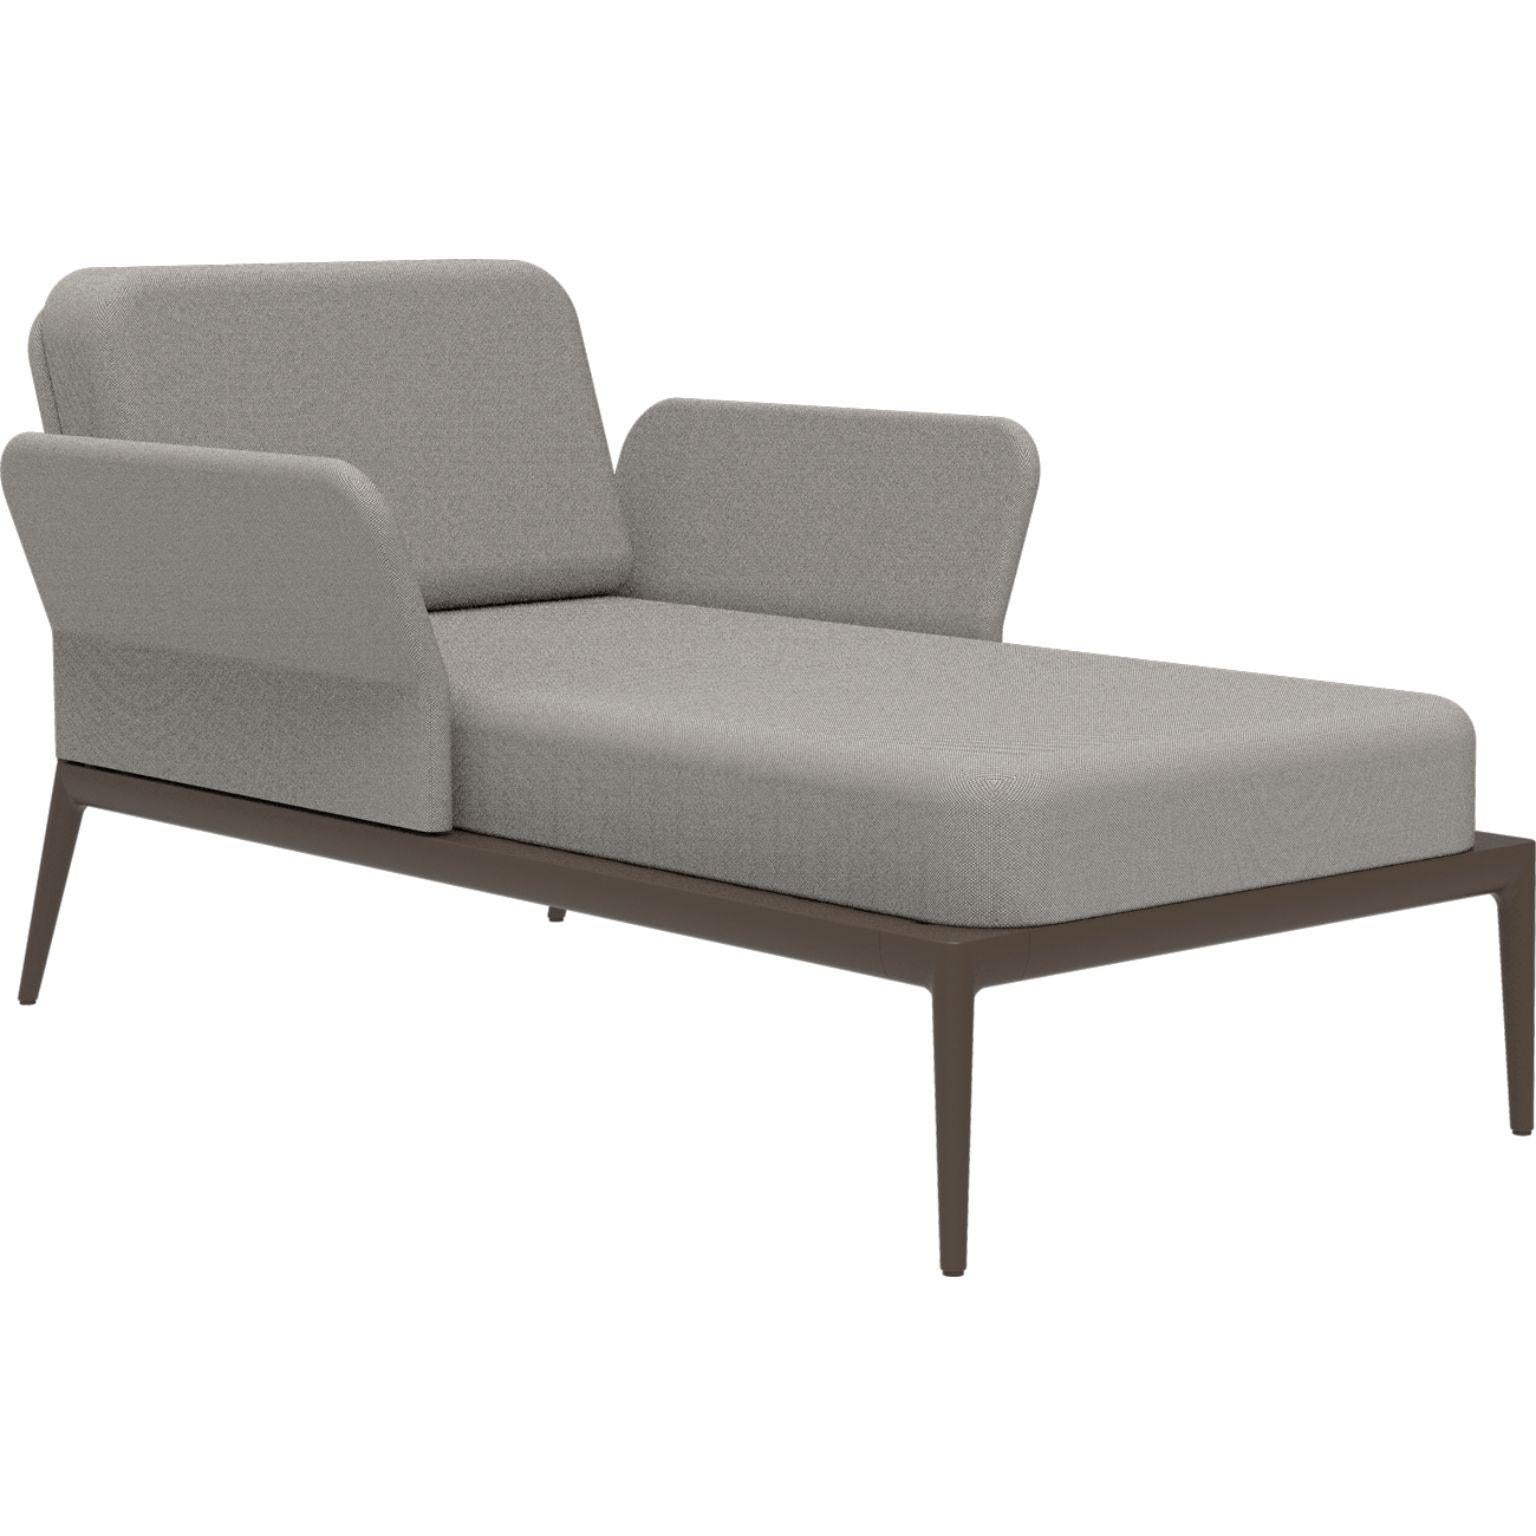 Cover bronze divan by MOWEE.
Dimensions: D91 x W155 x H81 cm (seat height 42 cm).
Material: Aluminum and upholstery.
Weight: 30 kg.
Also available in different colors and finishes.

An unmistakable collection for its beauty and robustness. A